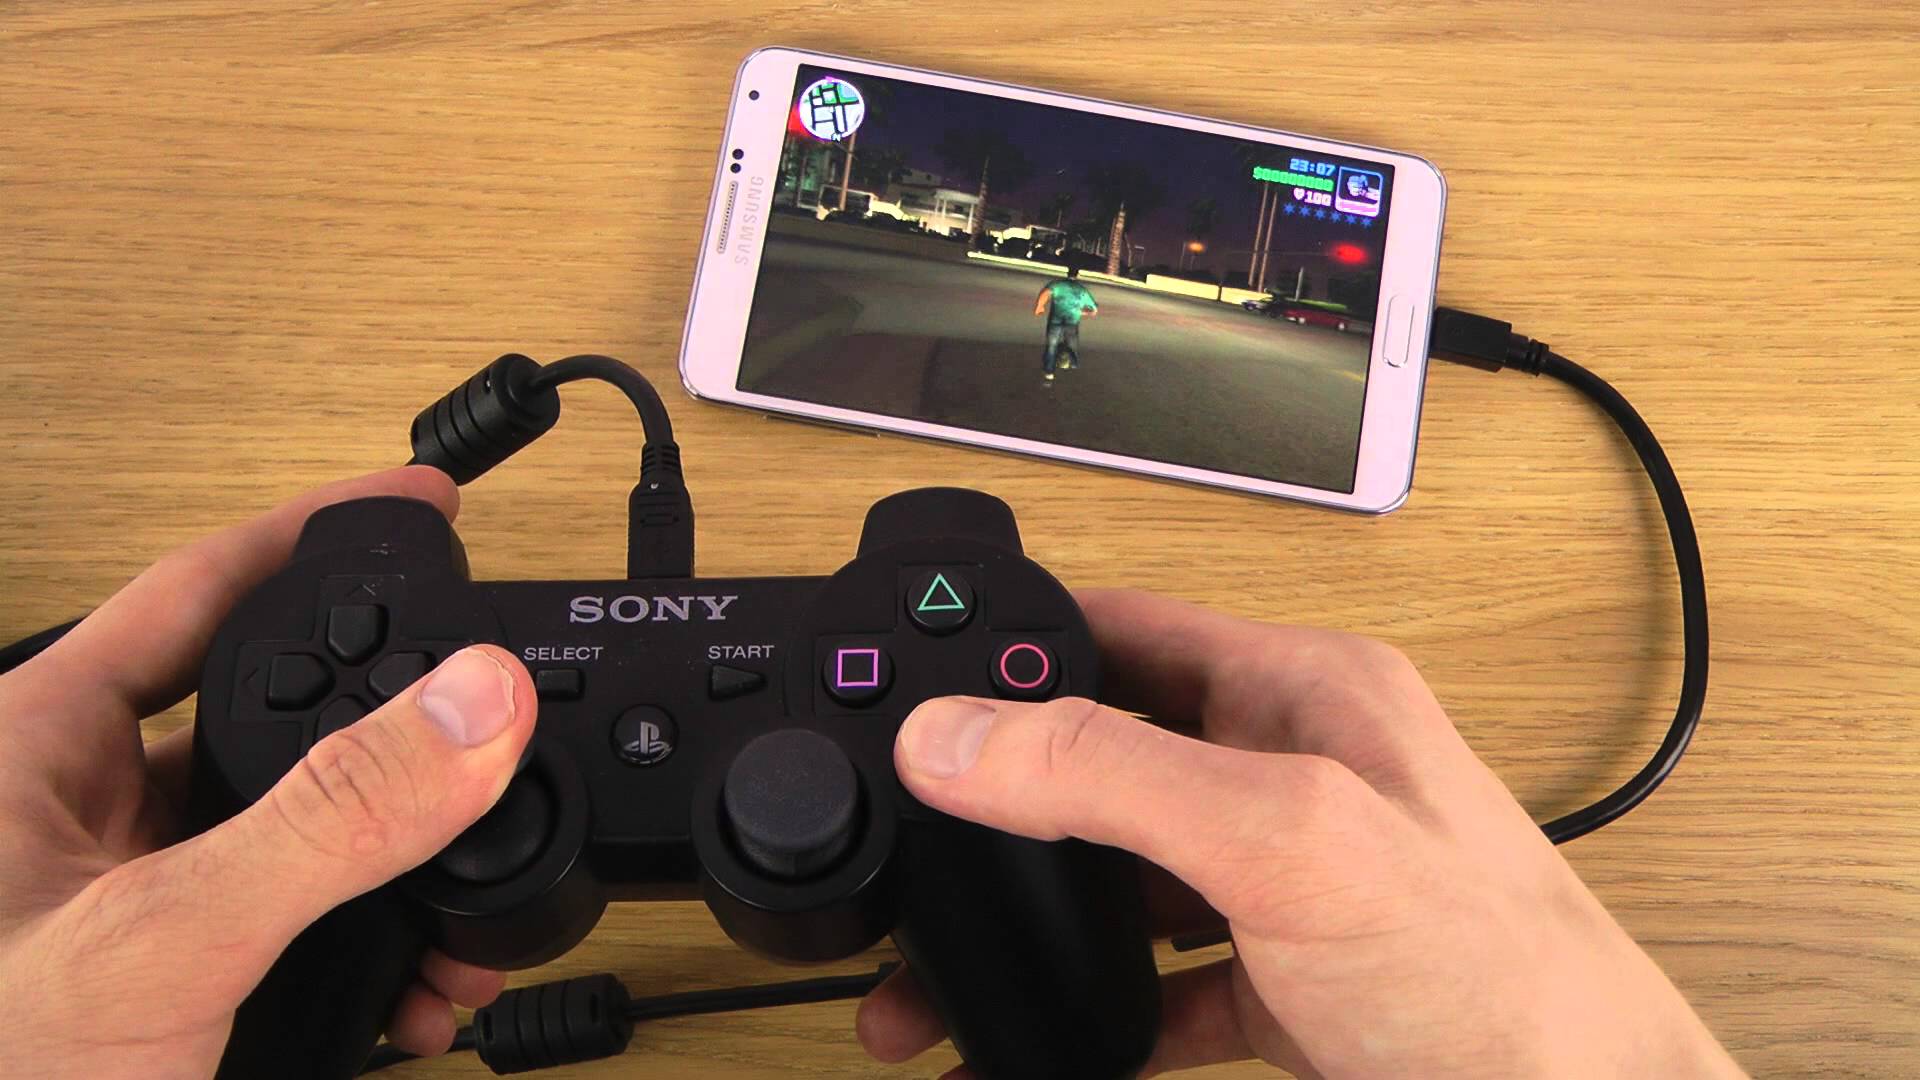 How To Pair PlayStation 3 Controller To Samsung Galaxy Note 3